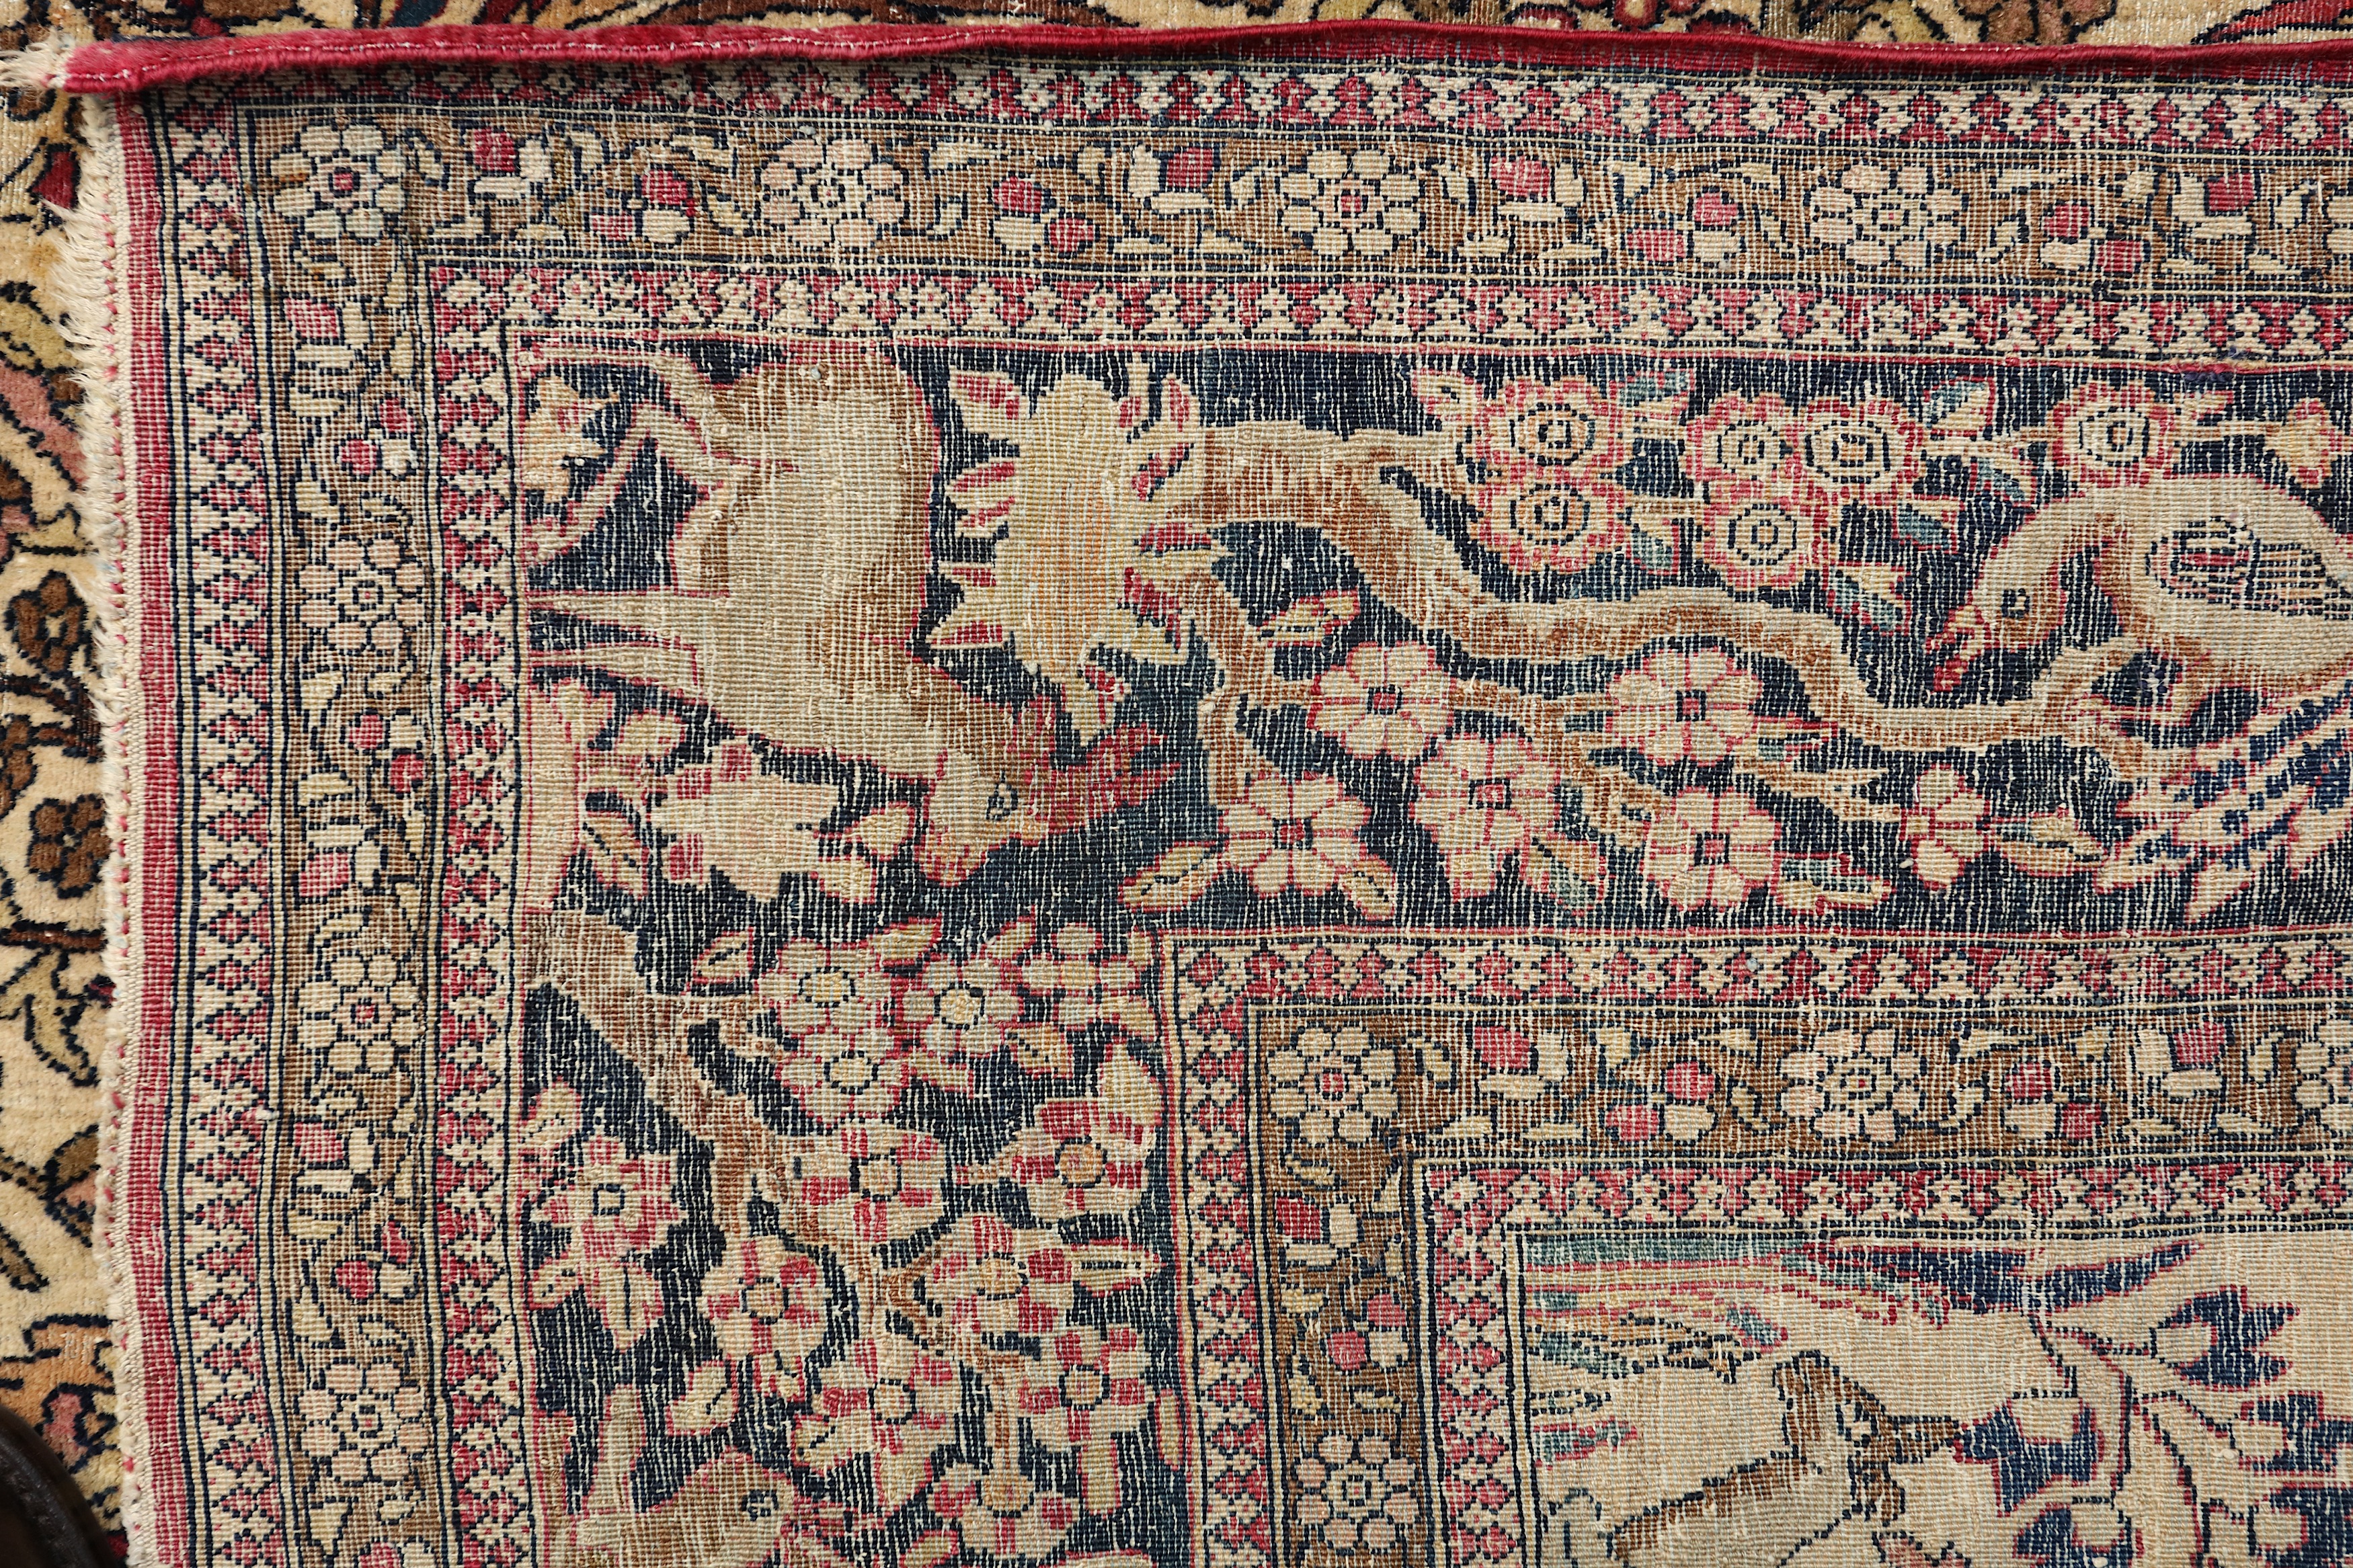 A VERY FINE ISFAHAN PRAYER RUG, CENTRAL PERSIA - Image 8 of 8